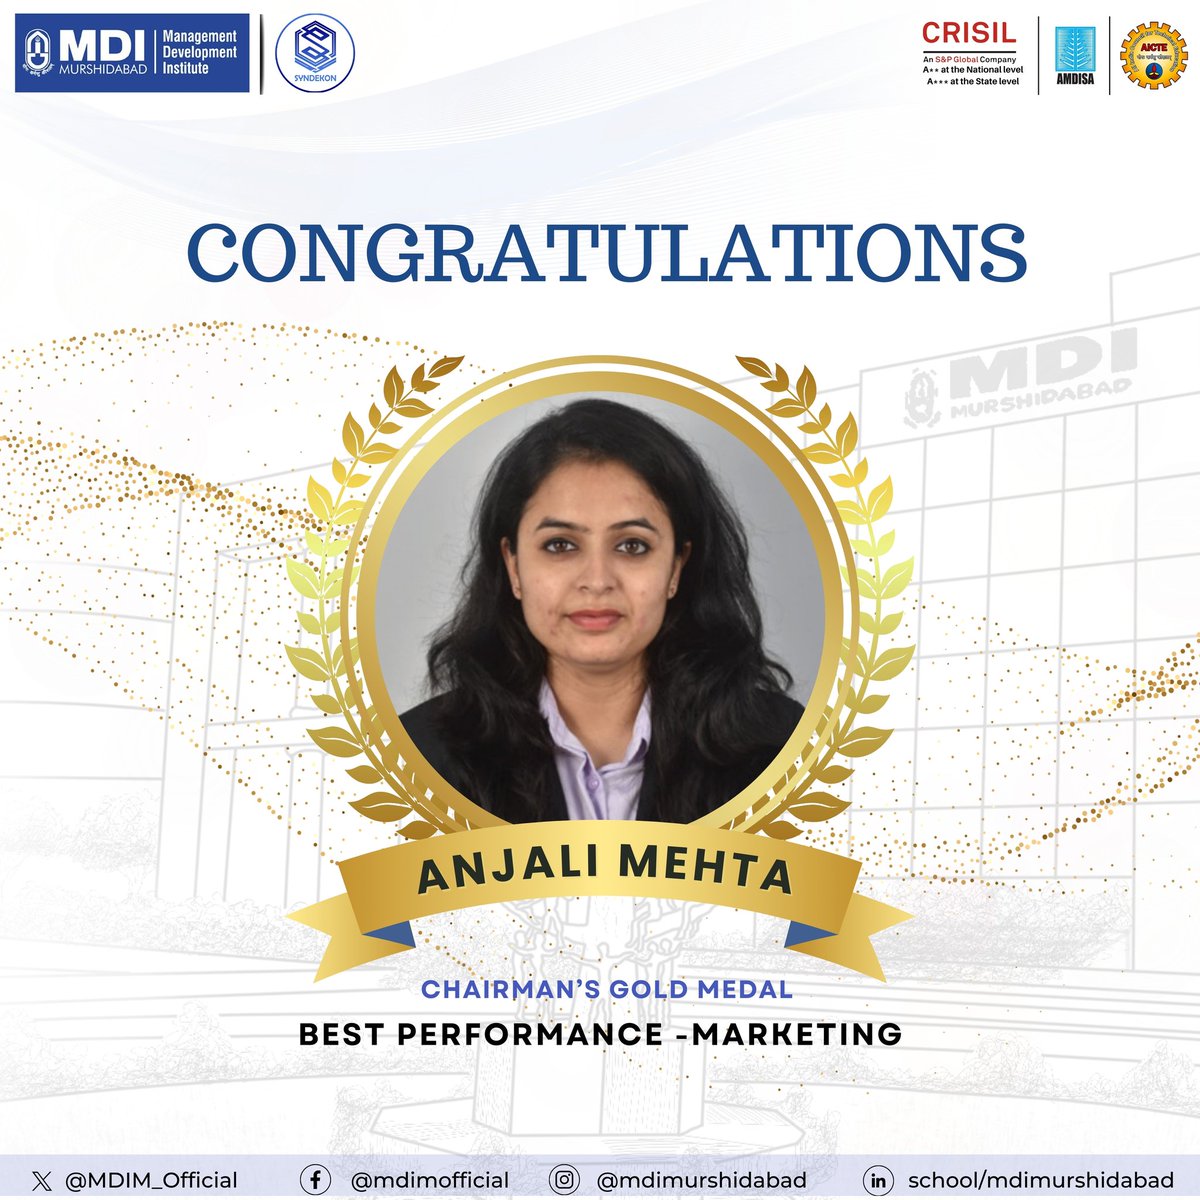 It gives immeasurable delight to #MDI Murshidabad to acknowledge Ms. Anjali Mehta's exemplary accomplishment, being bestowed with the Chairman's Gold Medal in #Marketing for the #PGDM class of 2022-24.
#MBA #MDIM #Management